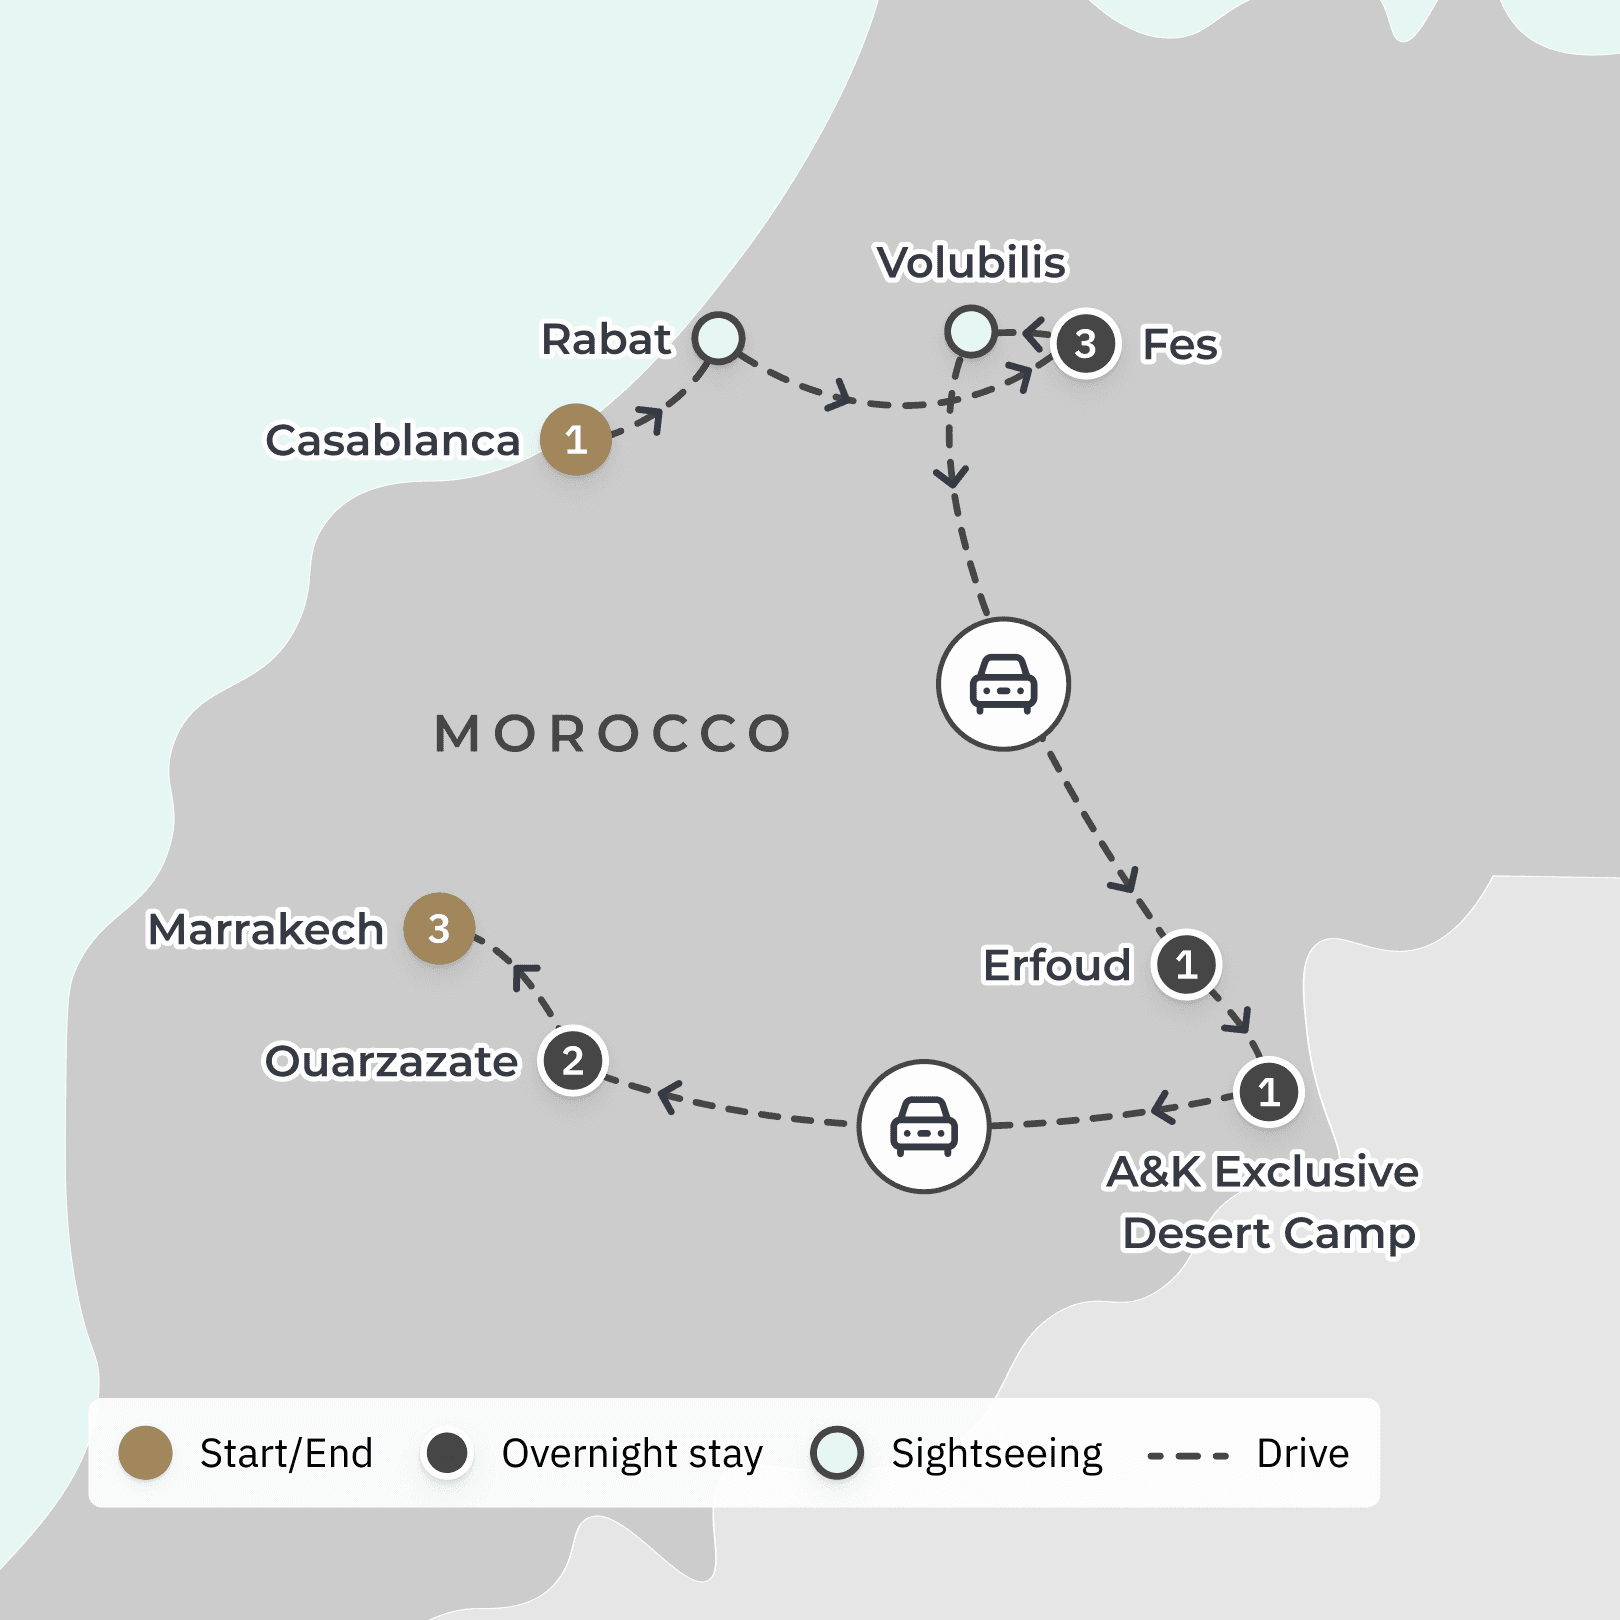 Splendours of Morocco Ultra-Lux Tour with Exclusive Desert Camp Stay, Sahara Camel Ride & Meknes Chef's Table Experience route map